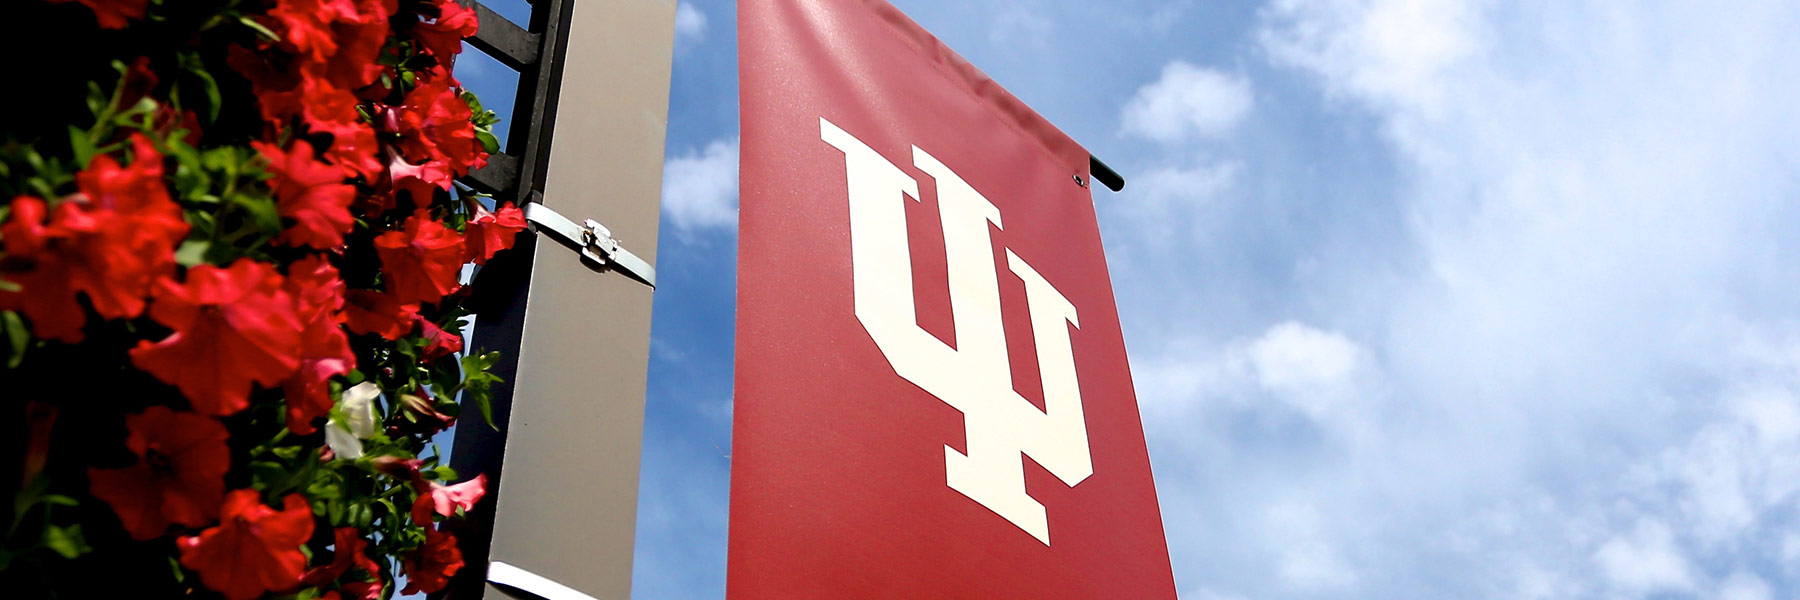 A red, IU trident banner hangs on a lamp post with a bright blue sky behind it.